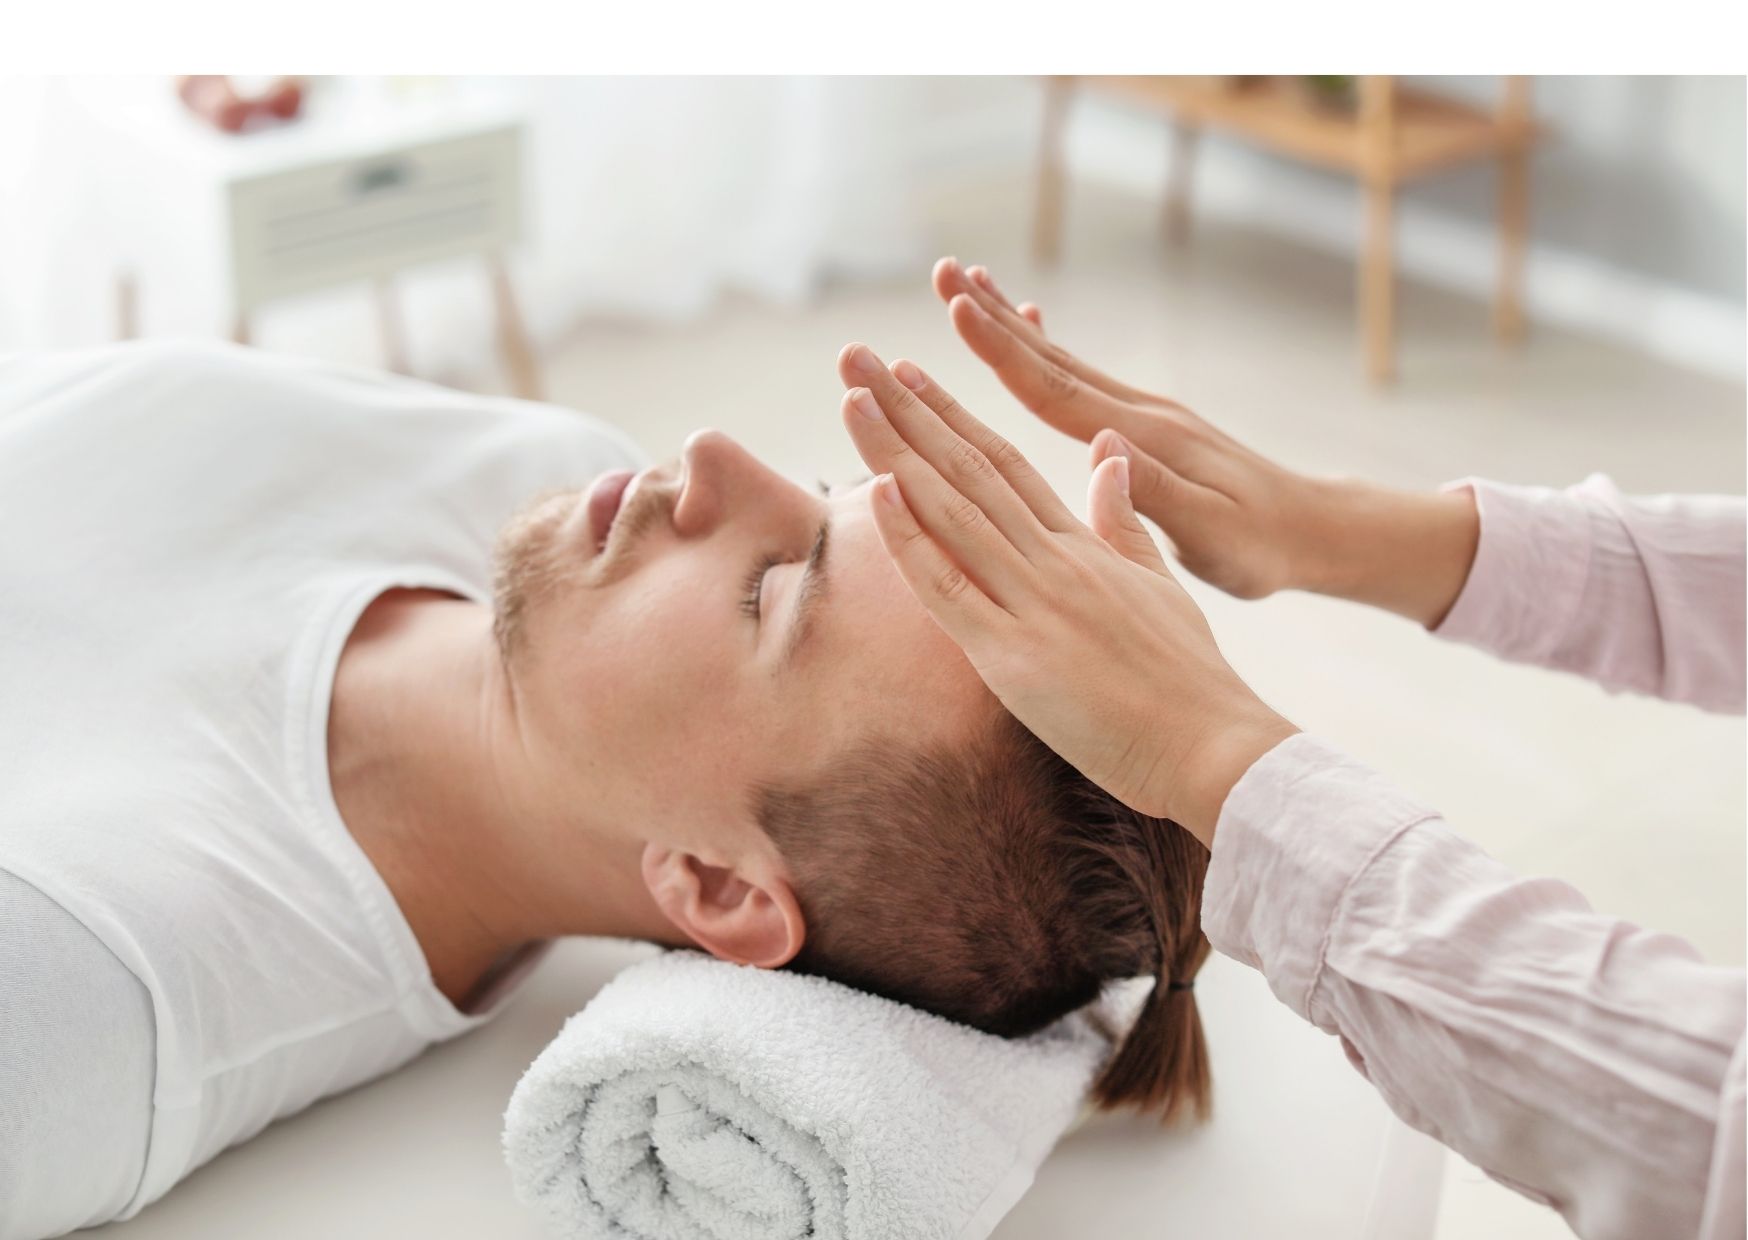 A man receiving Reiki while resting his head on the rolled towel